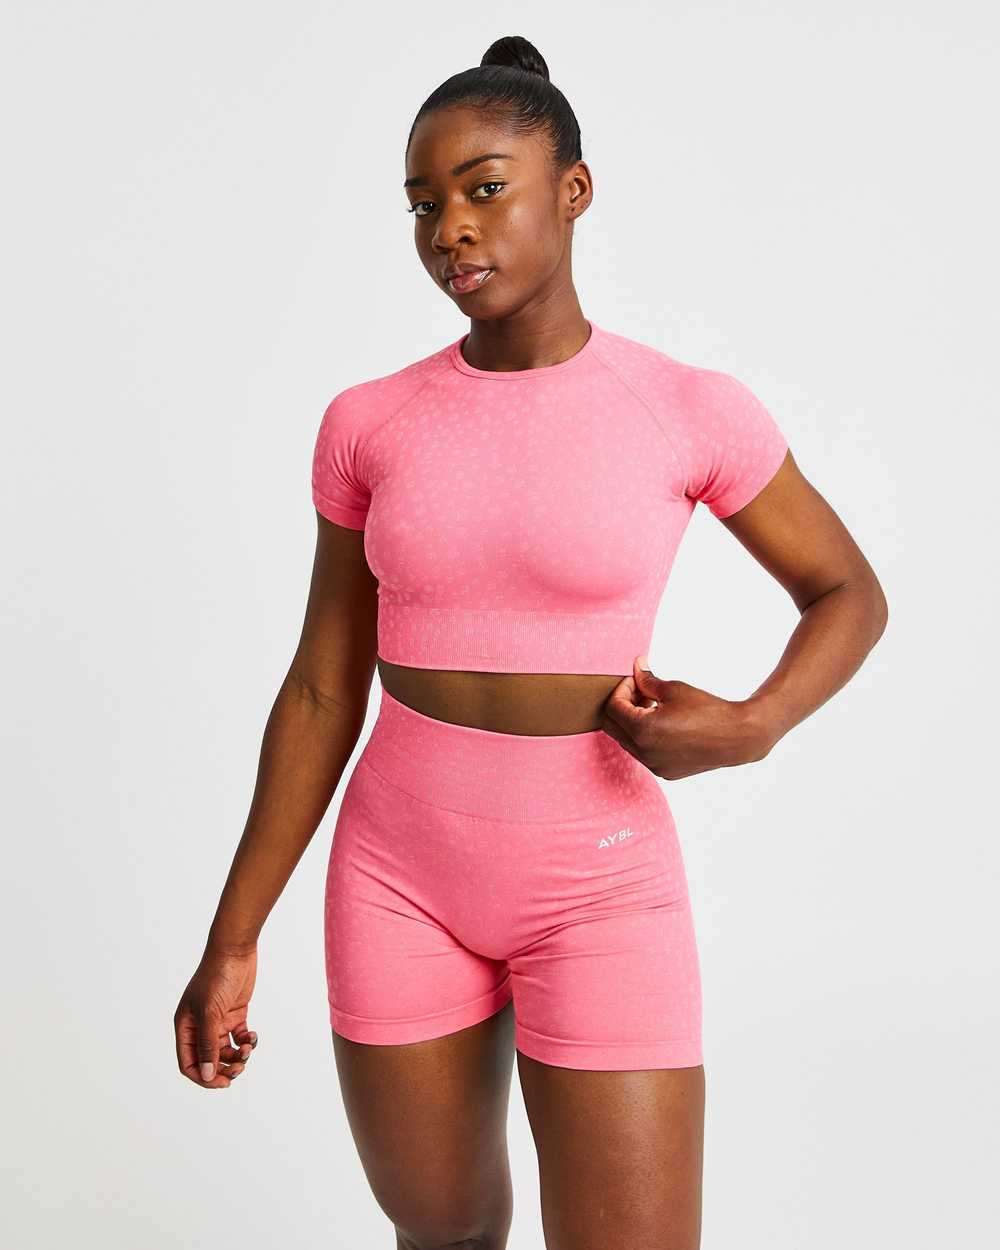 AYBL Evolve Speckle Seamless Crop Top - Coral Pink - image 1